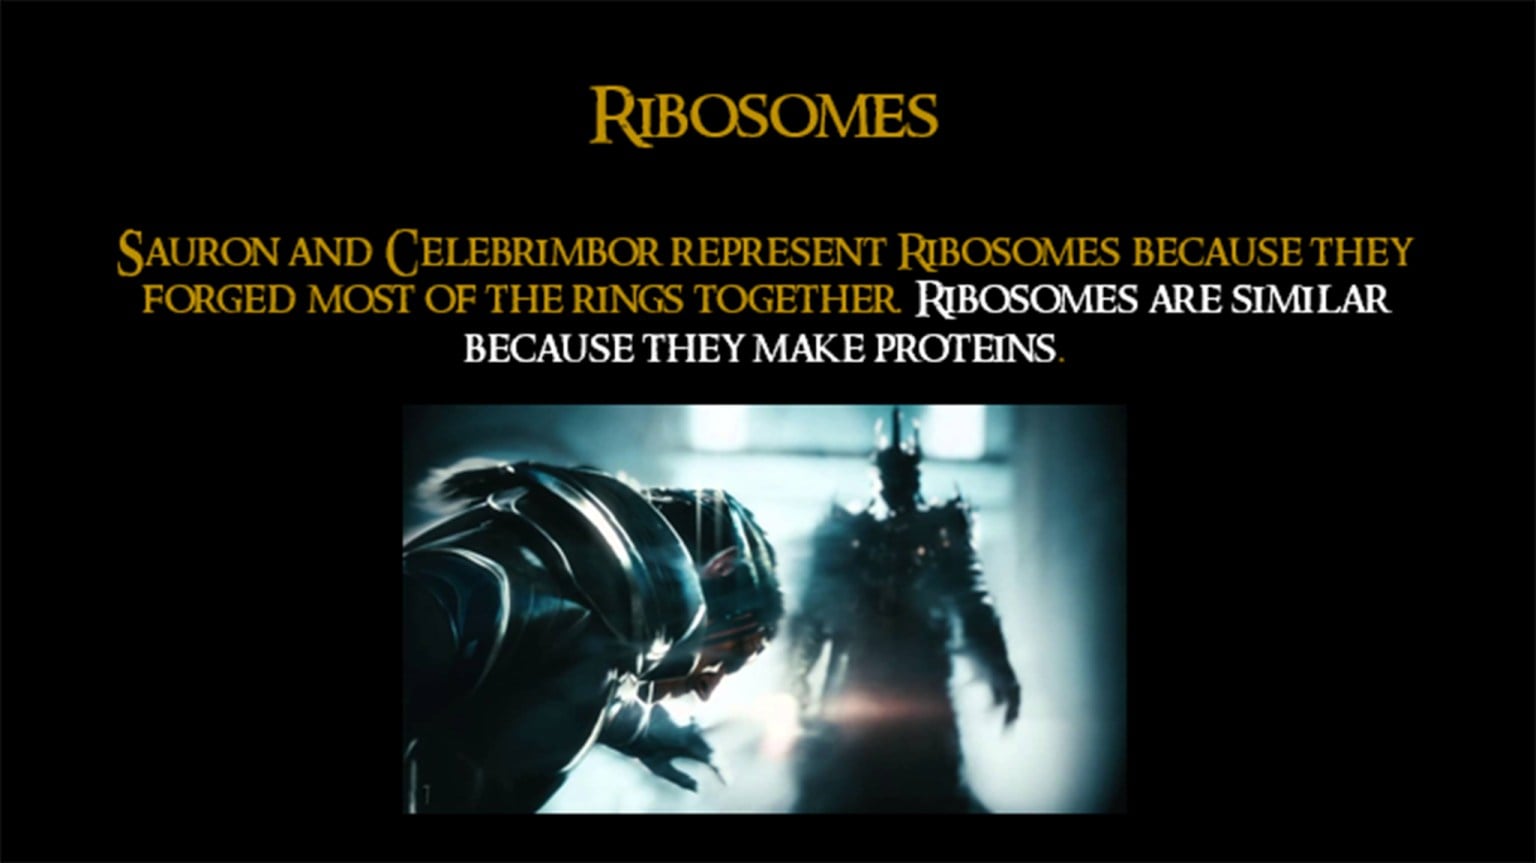 A slide about ribosomes using a Lord of the Rings analogy